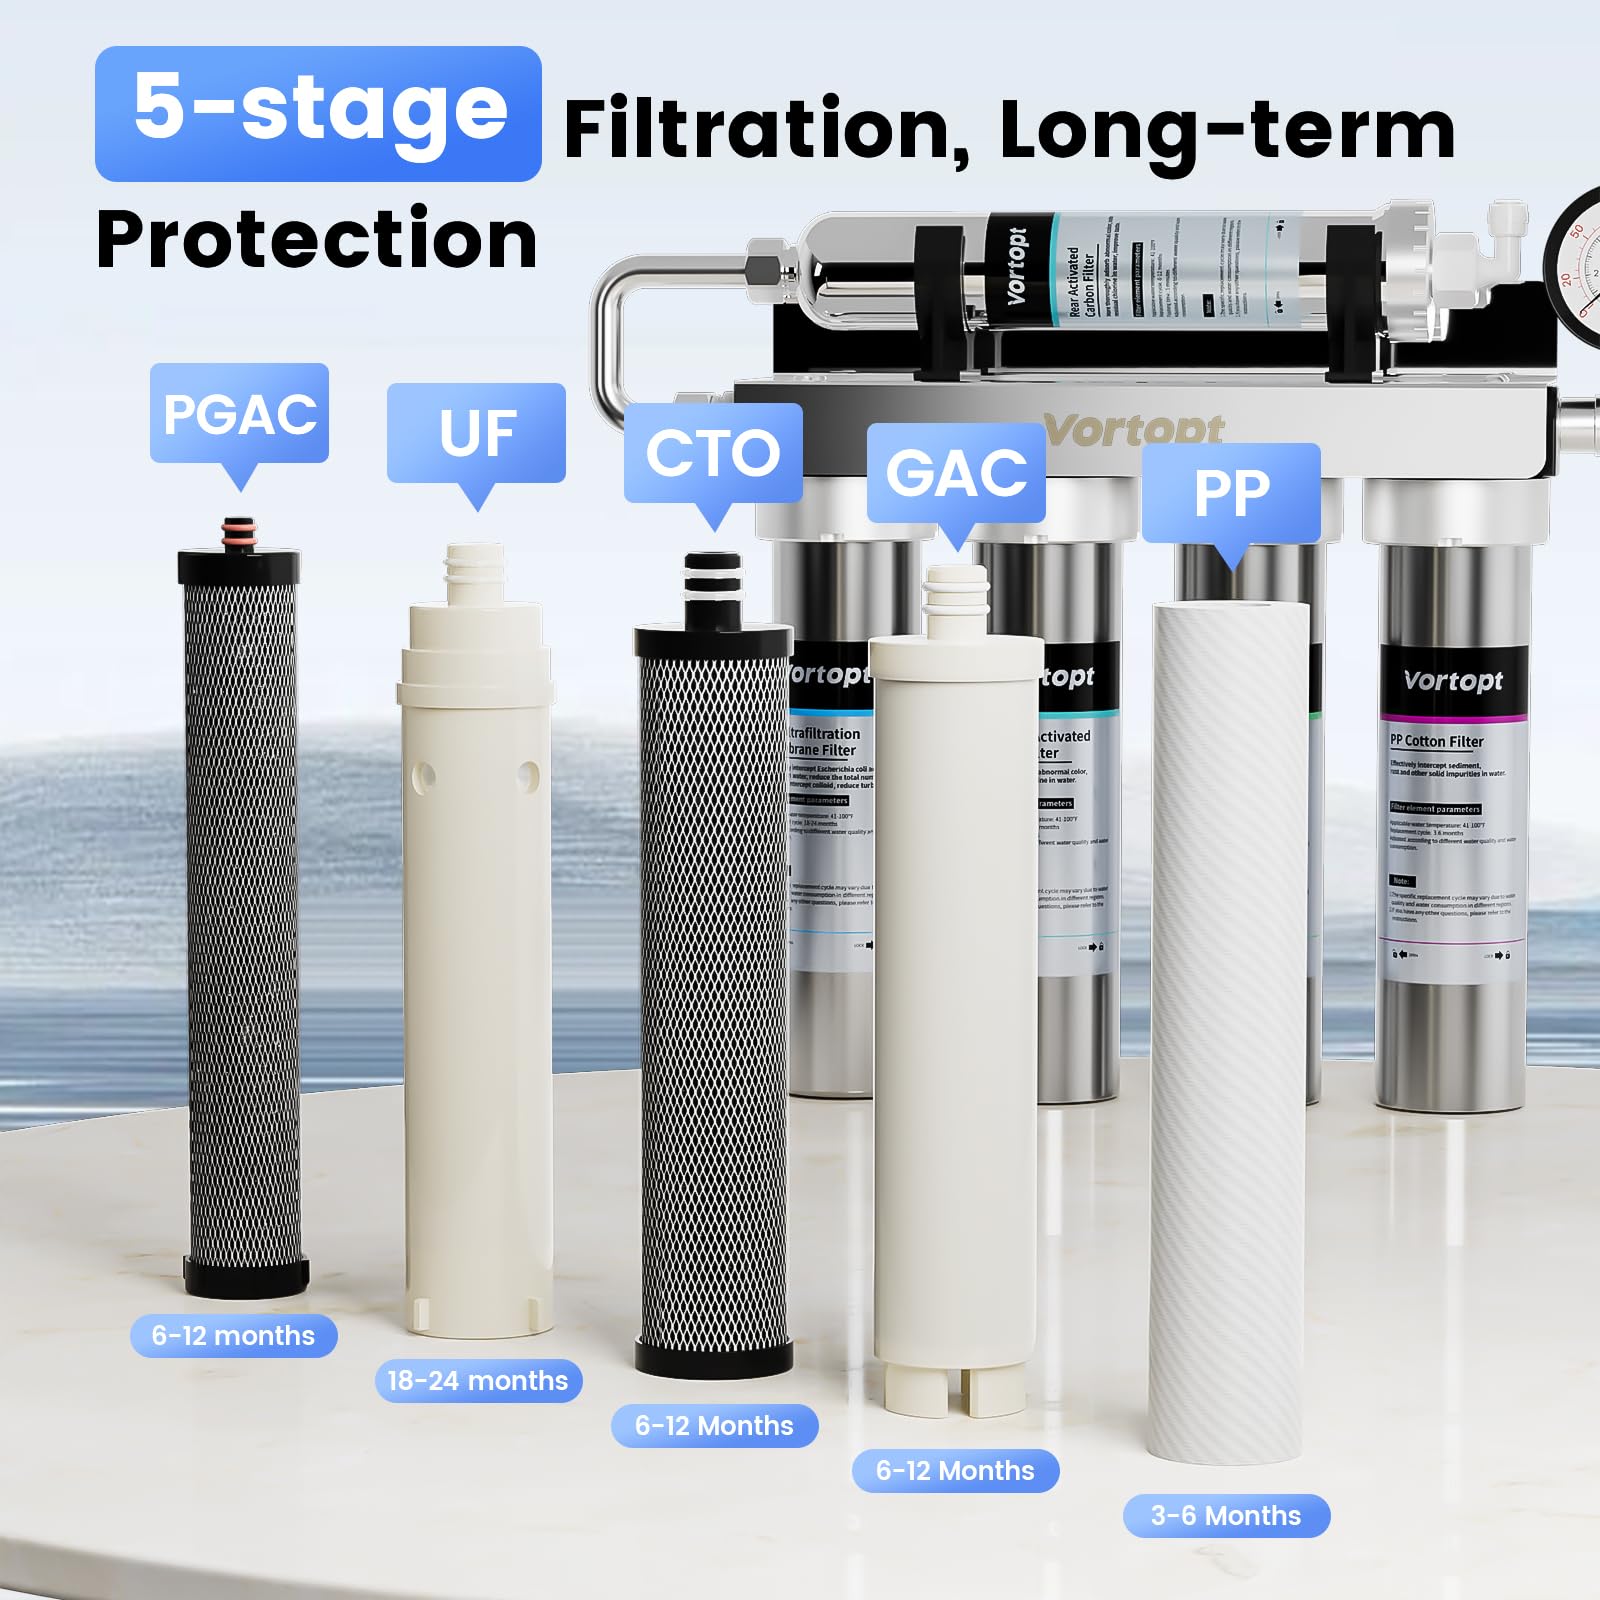 PP Replacement Filter Compatible with U1 Under Sink Water Filter,Vortopt 